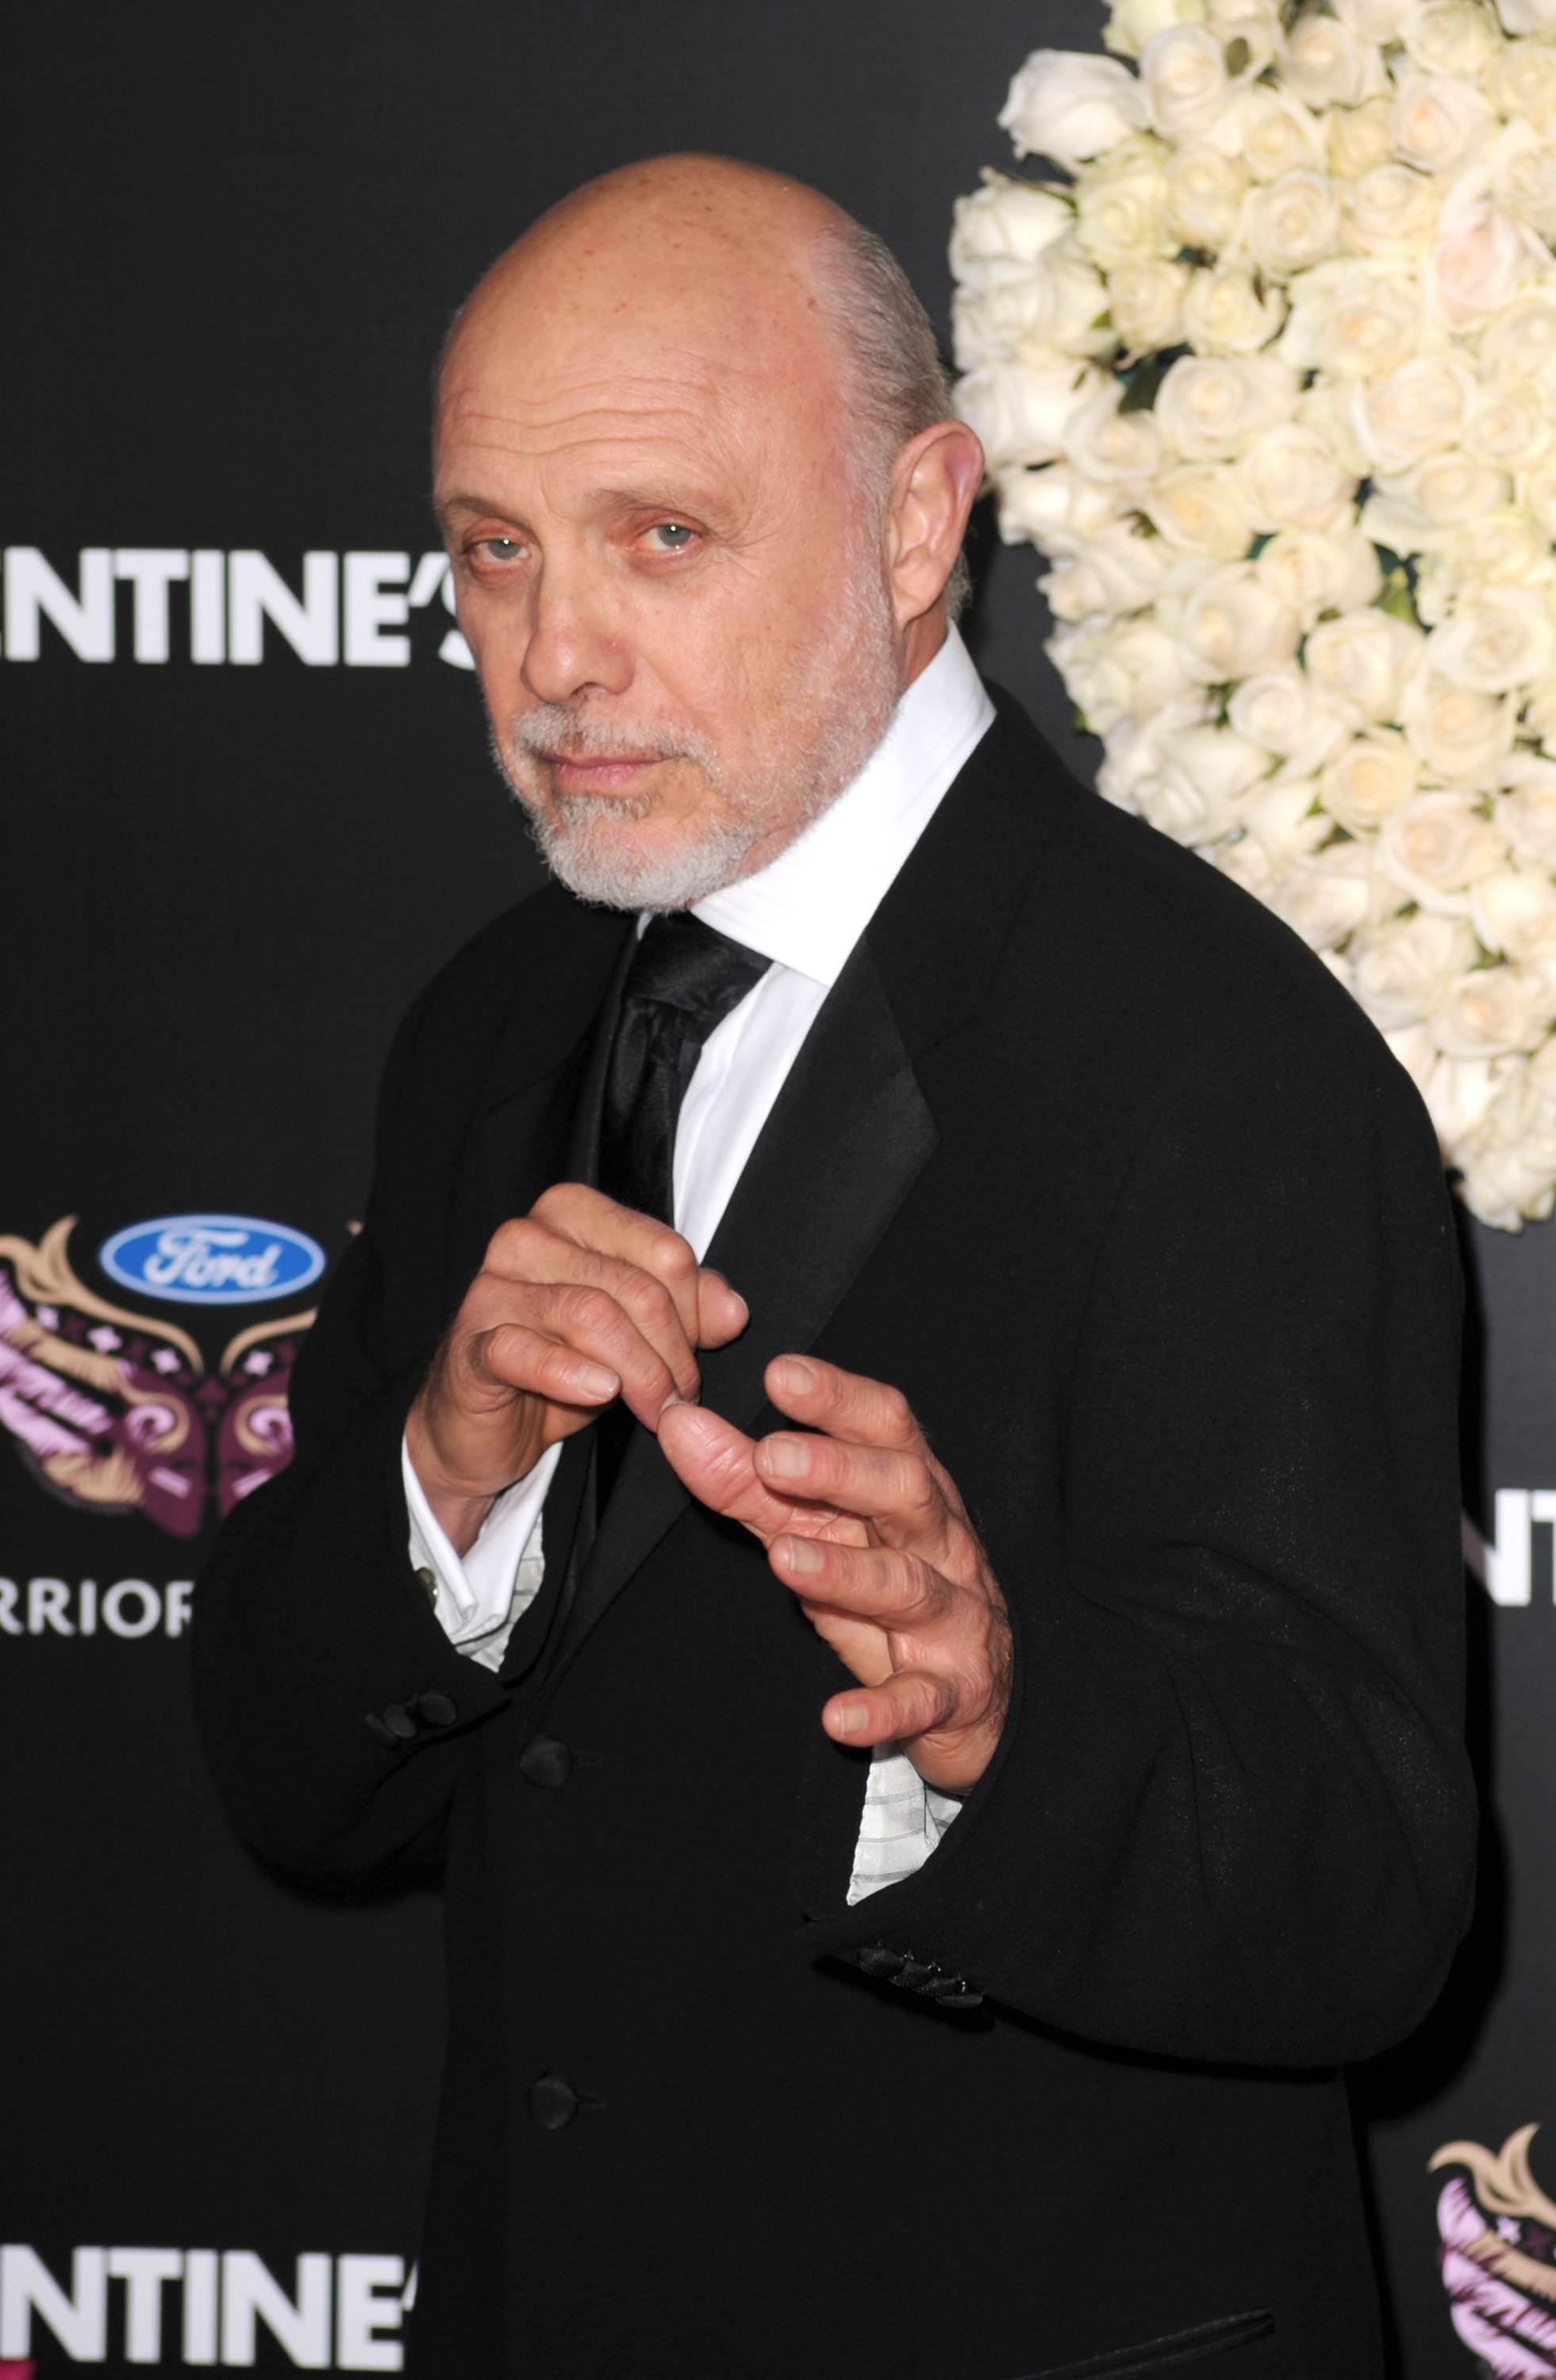 Hector Elizondo arrives at the "Valentine's Day" Los Angeles premiere held at Grauman's Chinese Theatre on February 8, 2010 in Hollywood, California. | Source: Getty Images